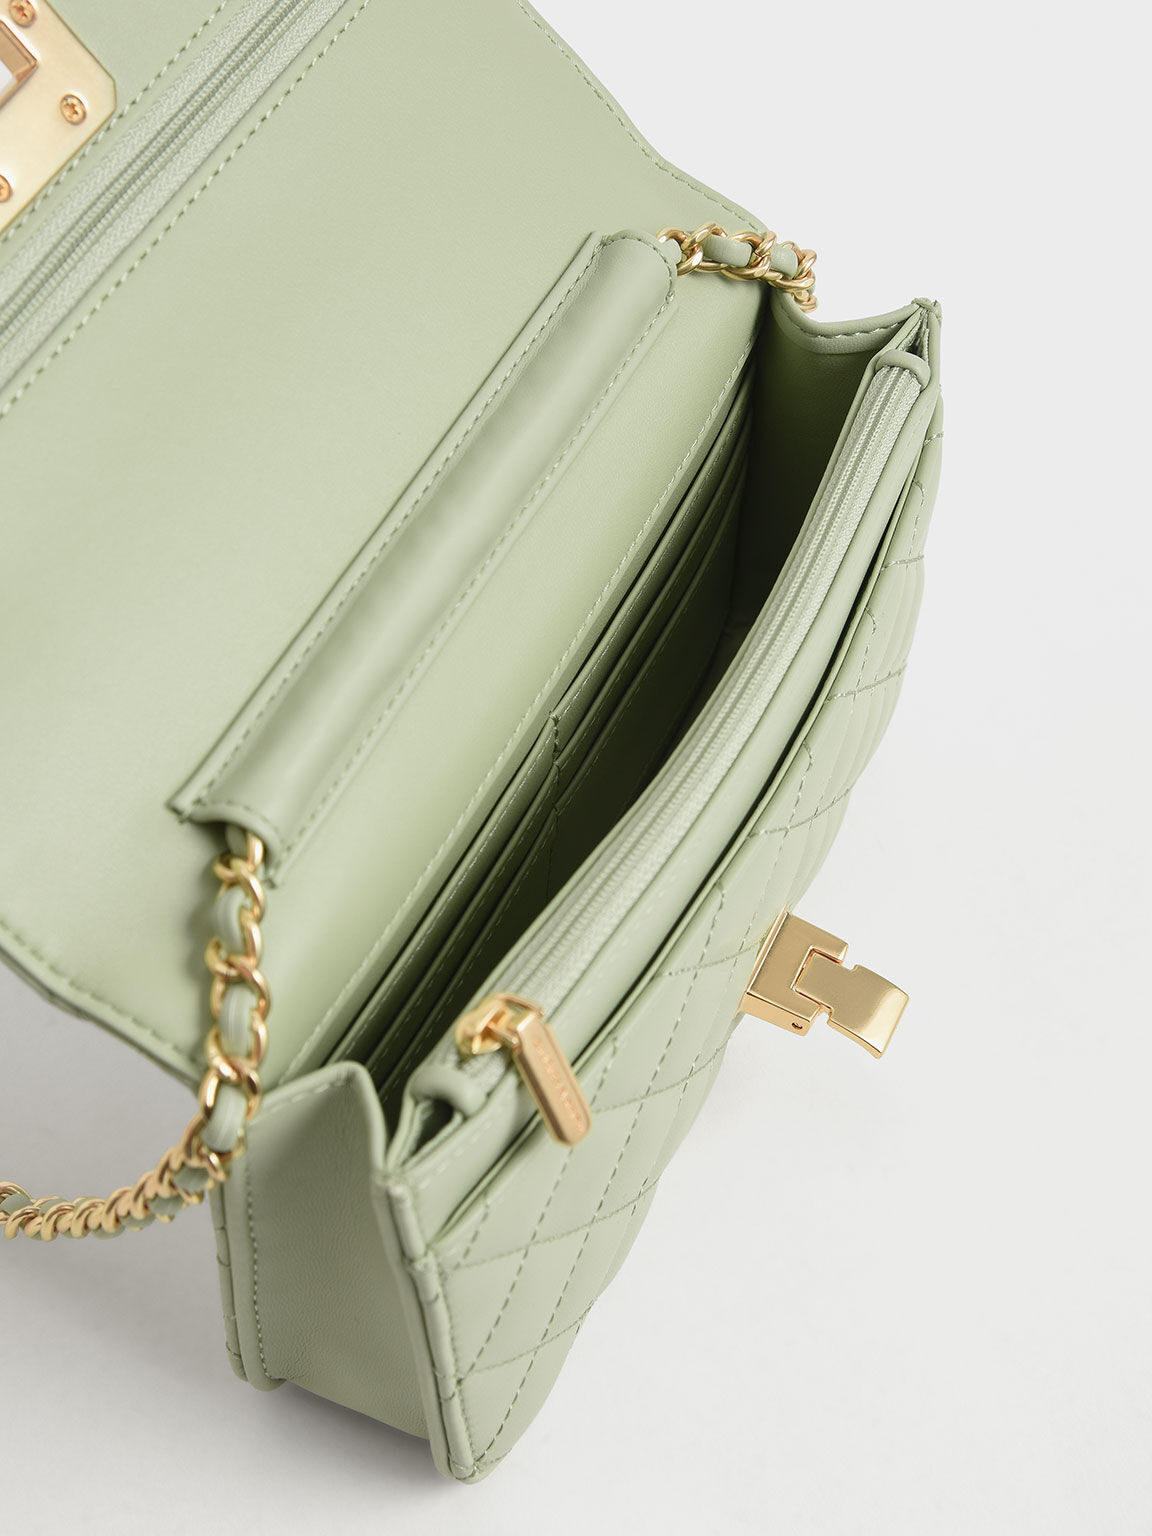 Quilted Push-Lock Clutch, Mint Green, hi-res